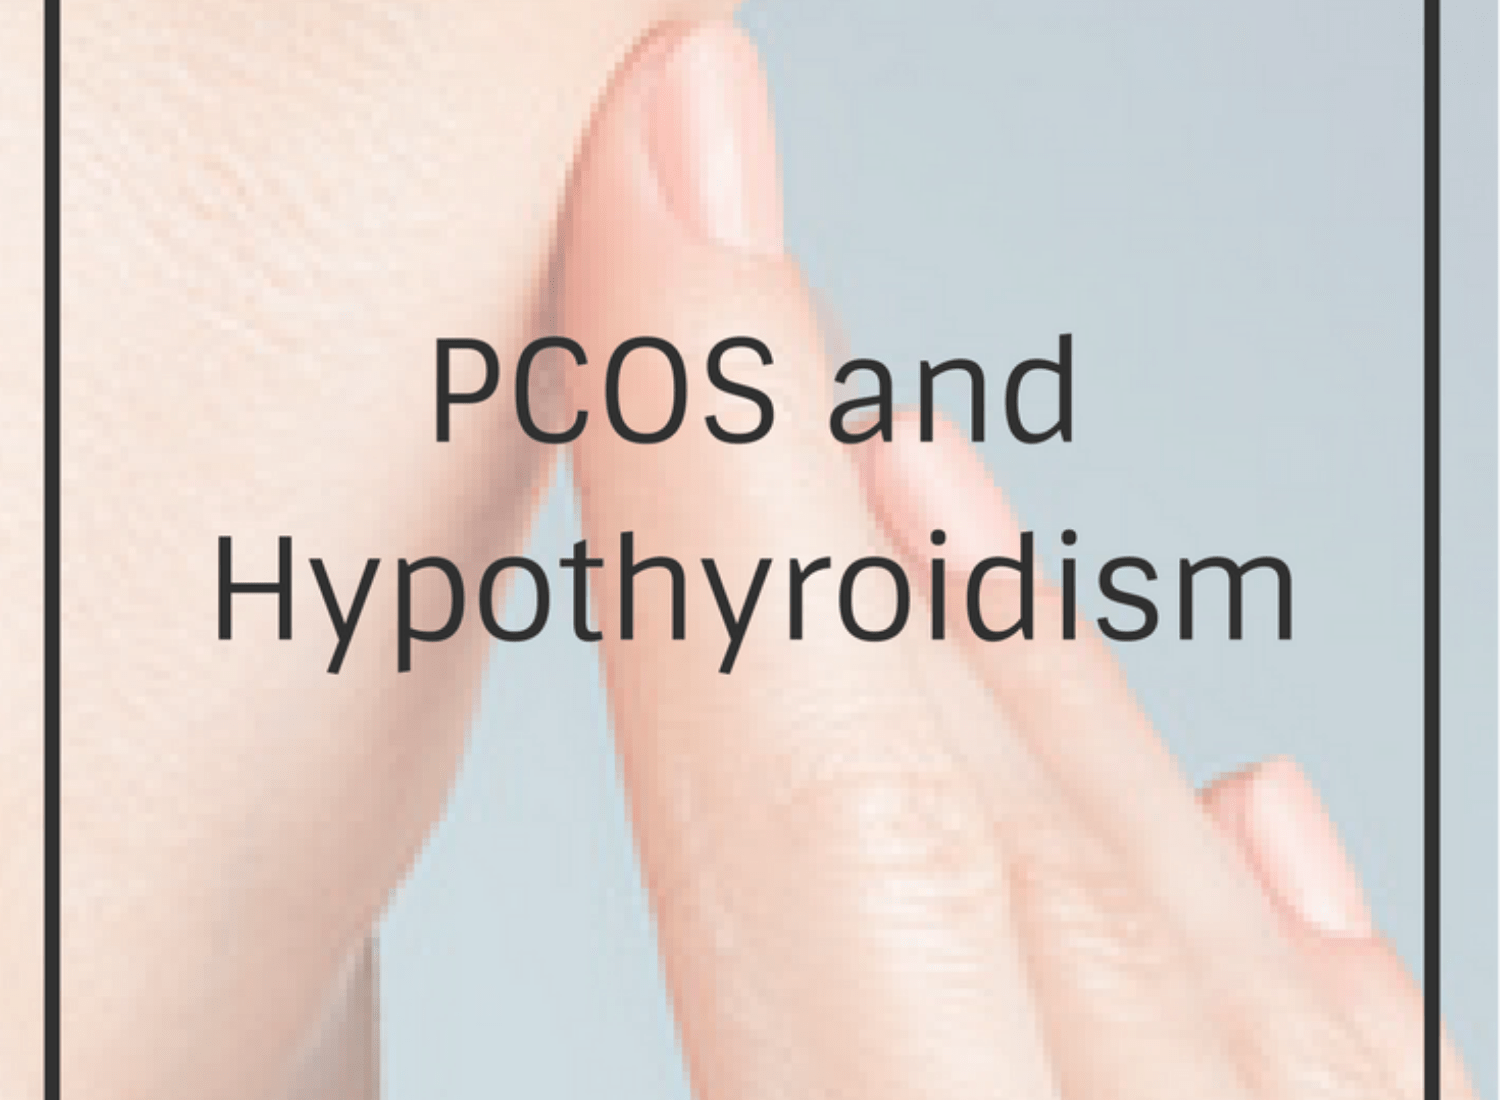 link between hypothyroidism and PCOS